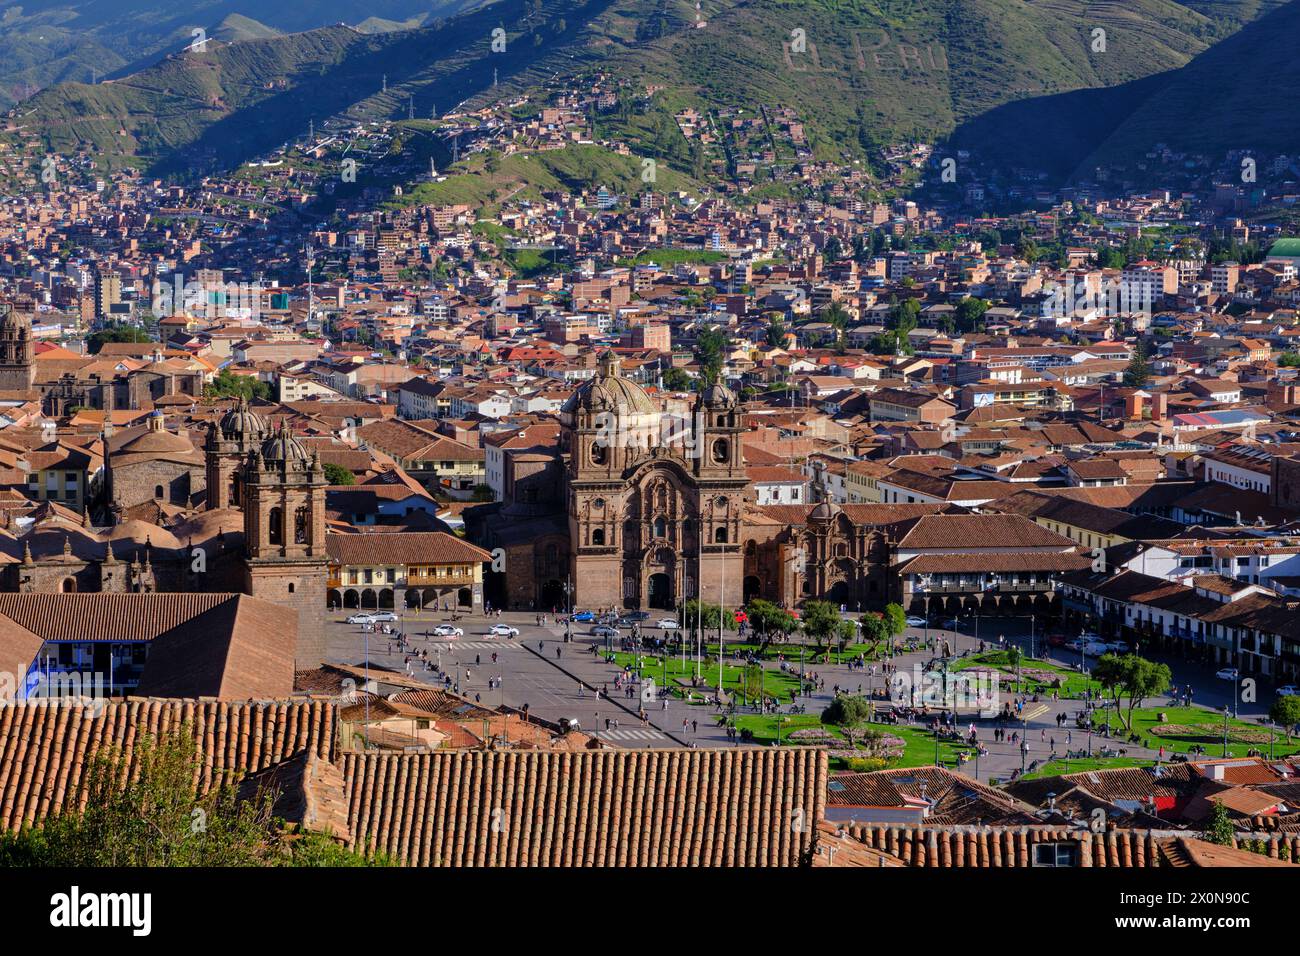 Peru, province of Cuzco, Cuzco, listed as a UNESCO World Heritage Site, view of the historic center and the Plaza de Armas Stock Photo